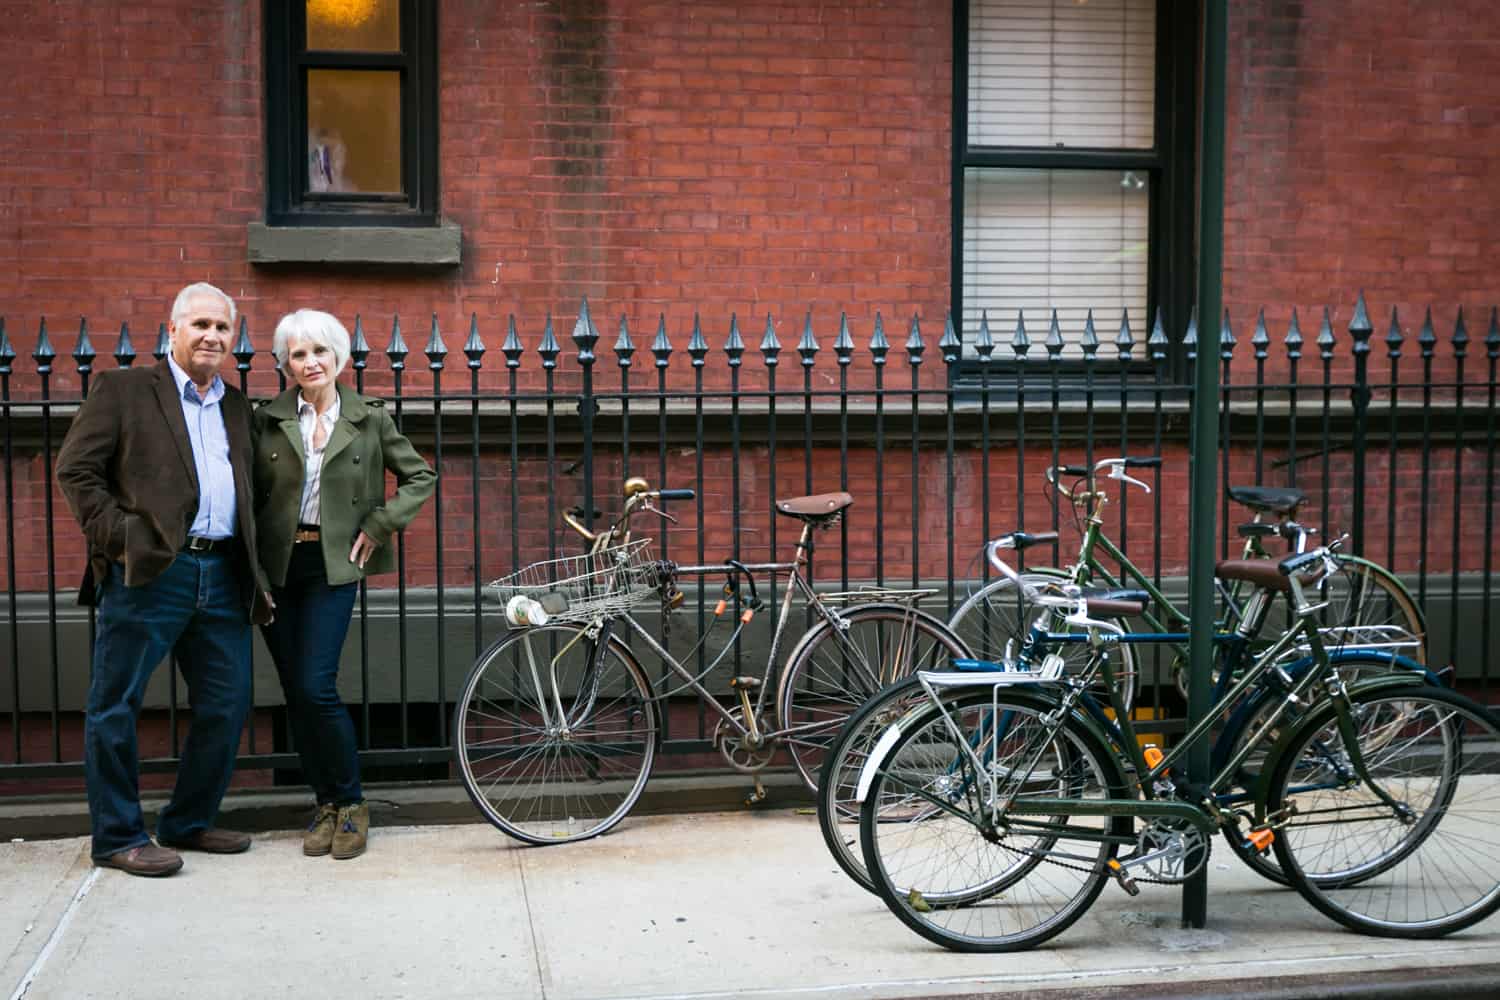 Older couple leaning on fence to left of parked bicycles